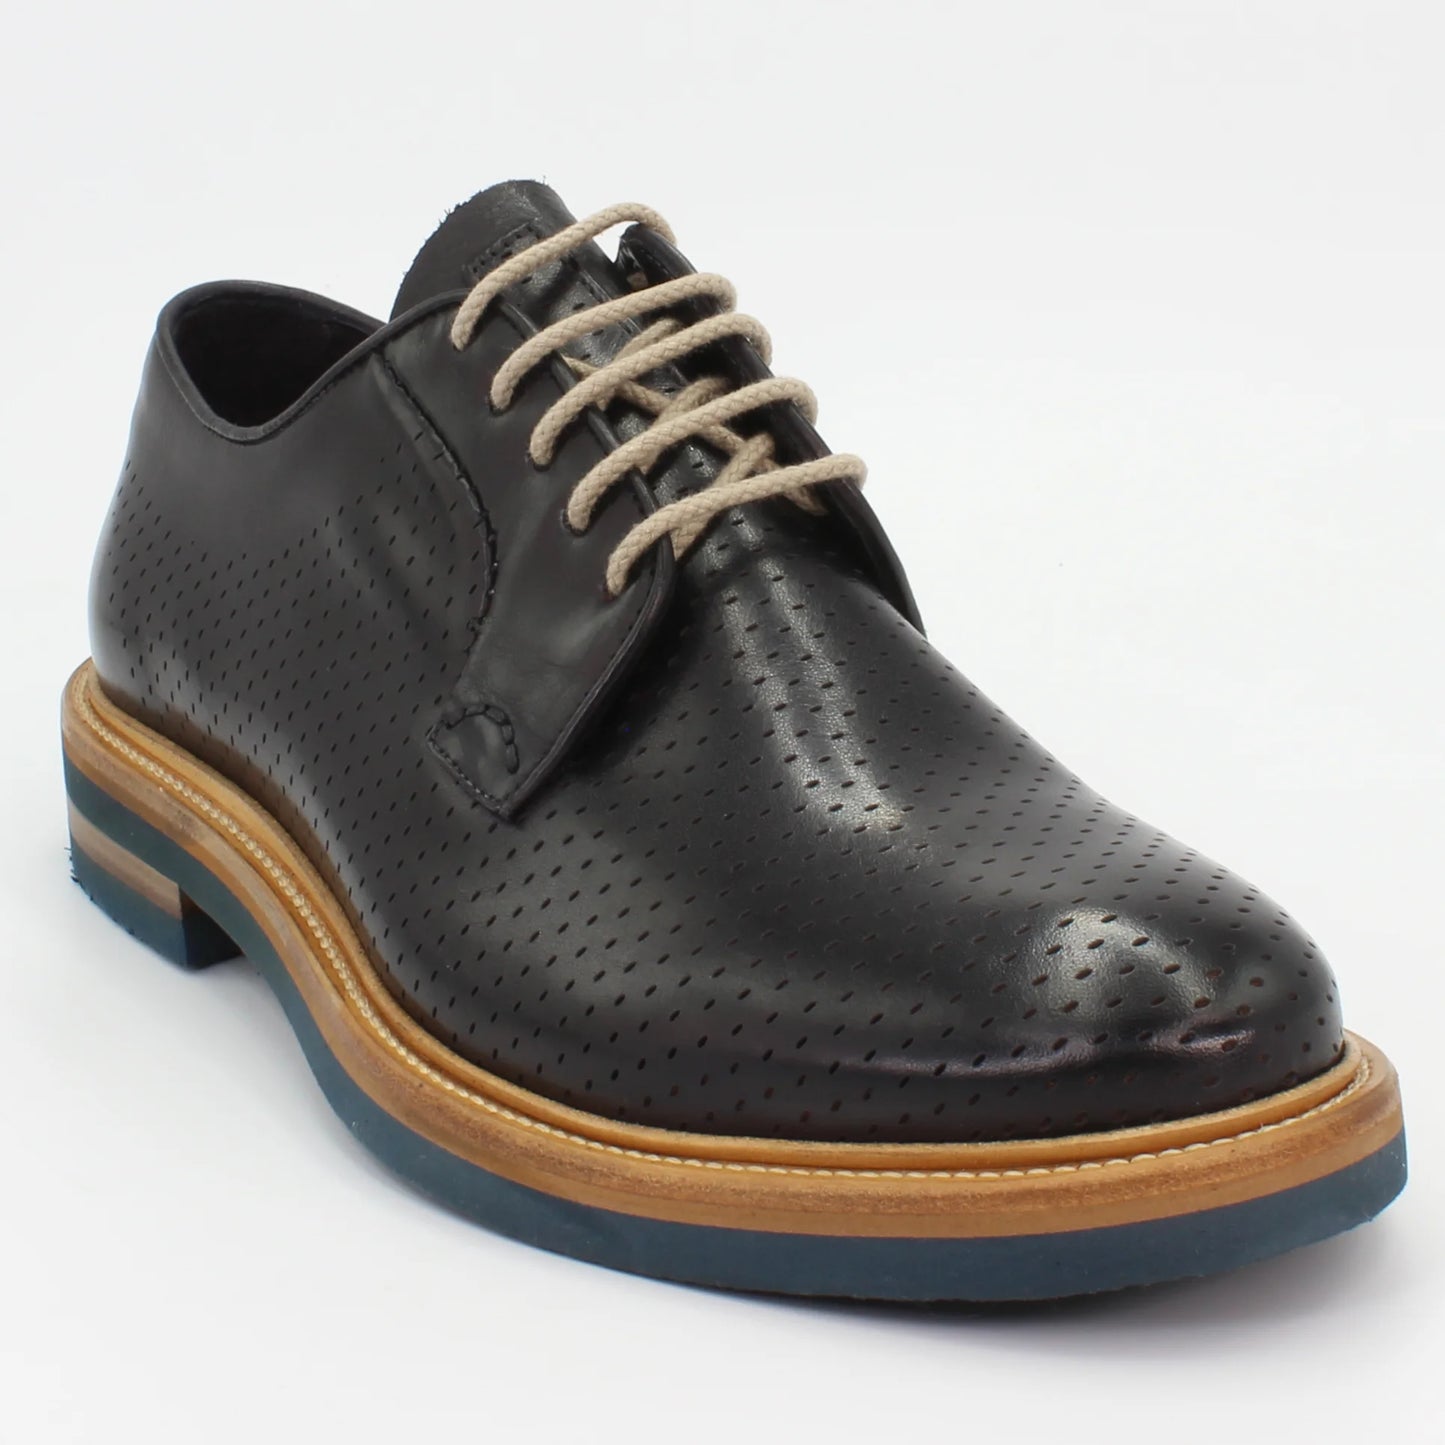 Shop Handmade Italian Leather derby in ink blue (BRU8652) or browse our range of hand-made Italian shoes for men in leather or suede in-store at Aliverti Cape Town, or shop online. We deliver in South Africa & offer multiple payment plans as well as accept multiple safe & secure payment methods.